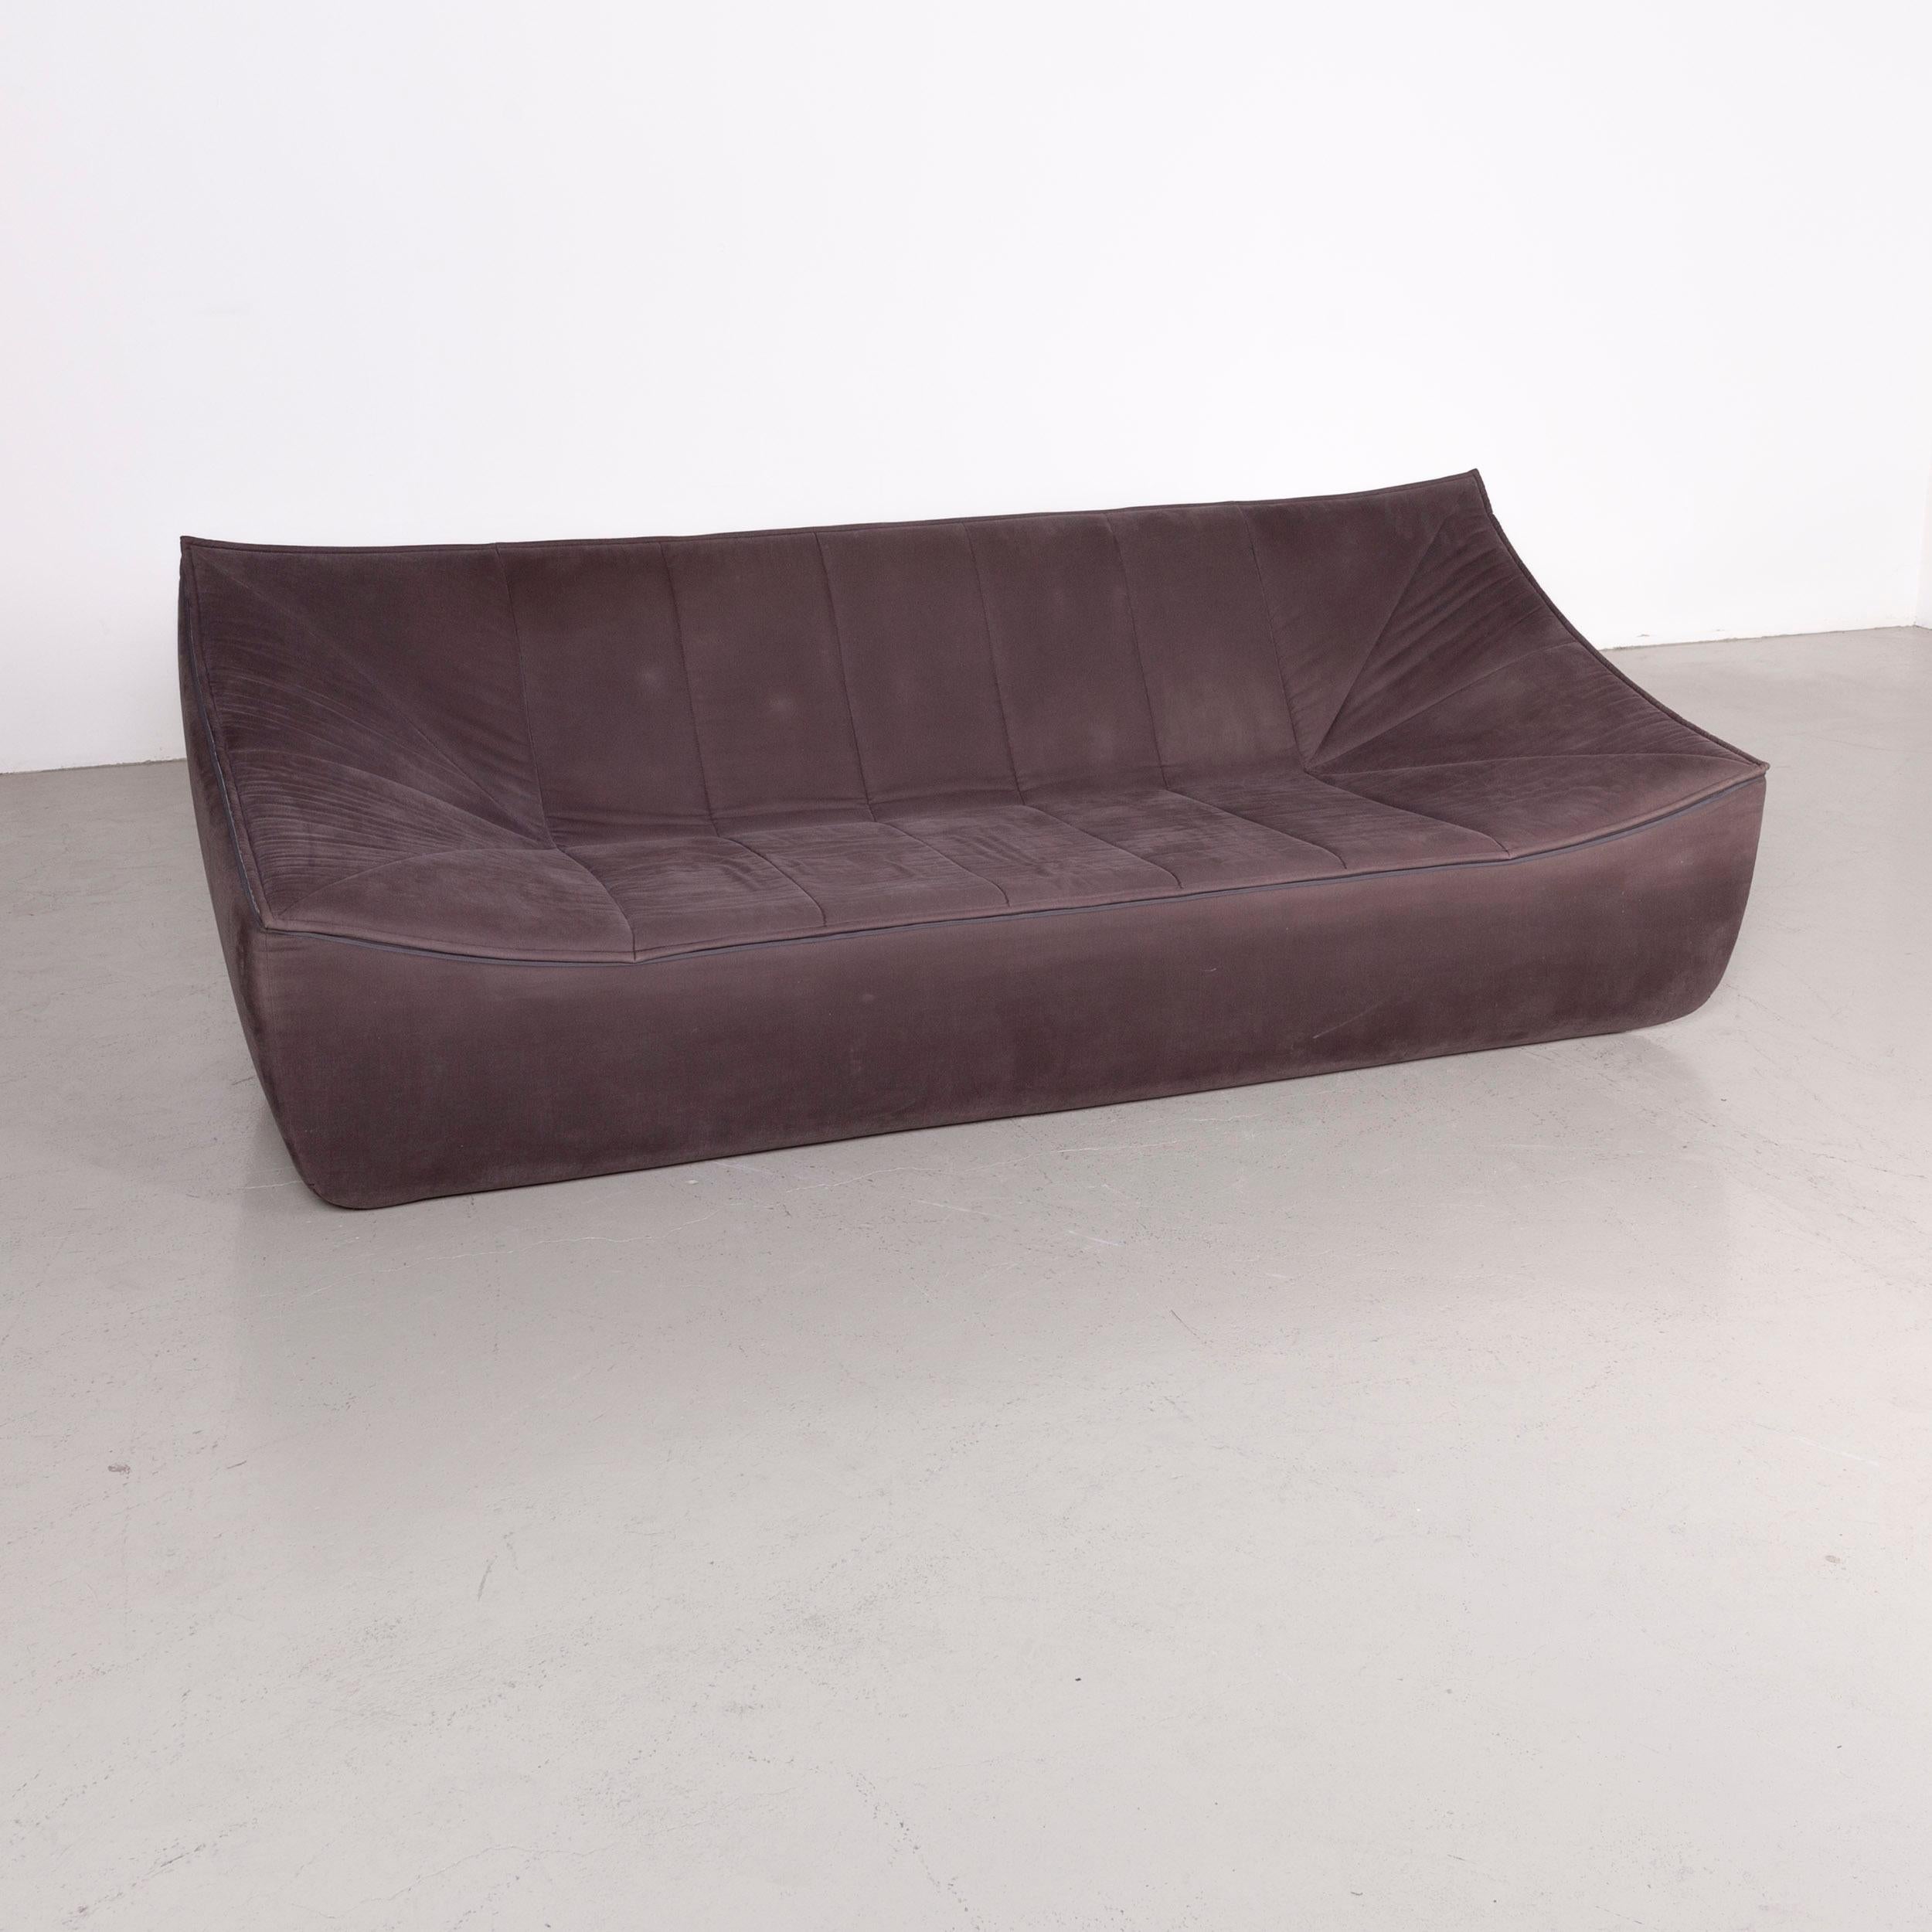 We bring to you a COR Bahir designer fabric sofa brown three-seat couch.












